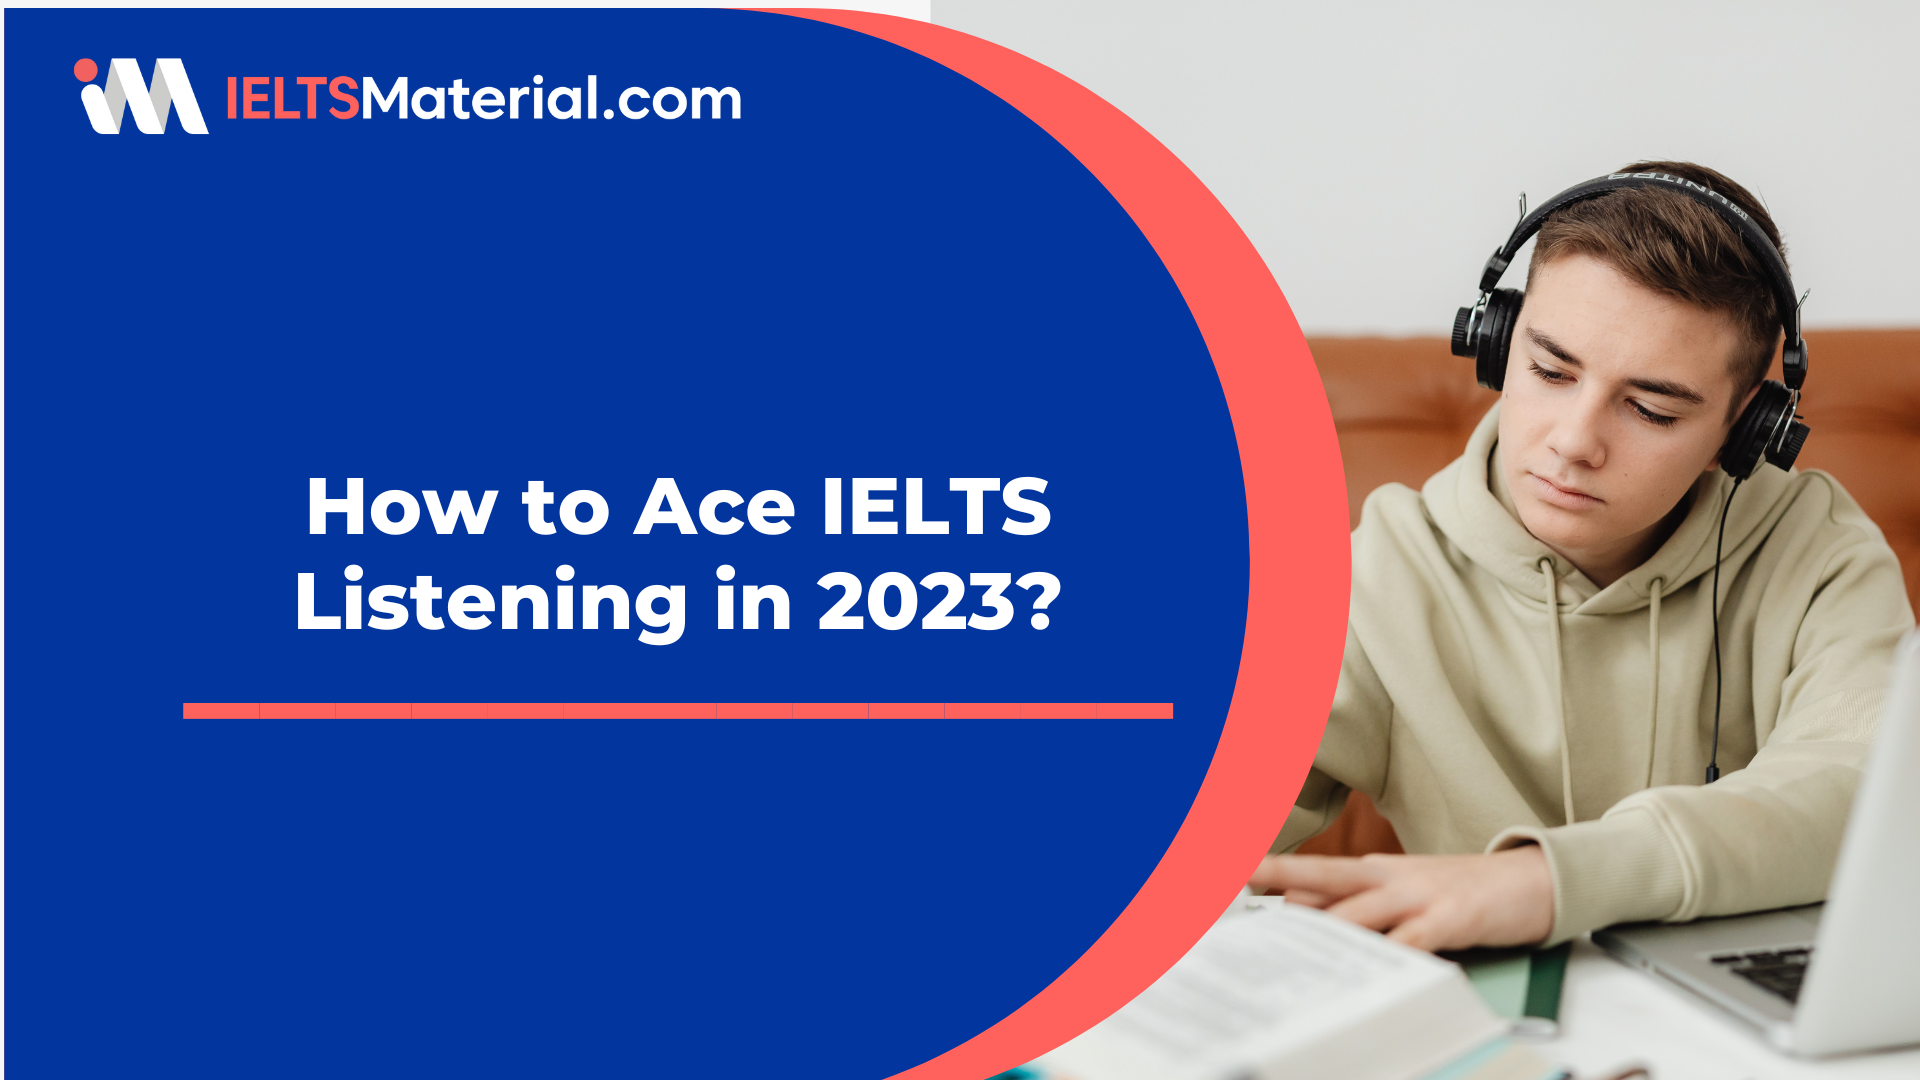 How to ace the IELTS listening section in 2023?